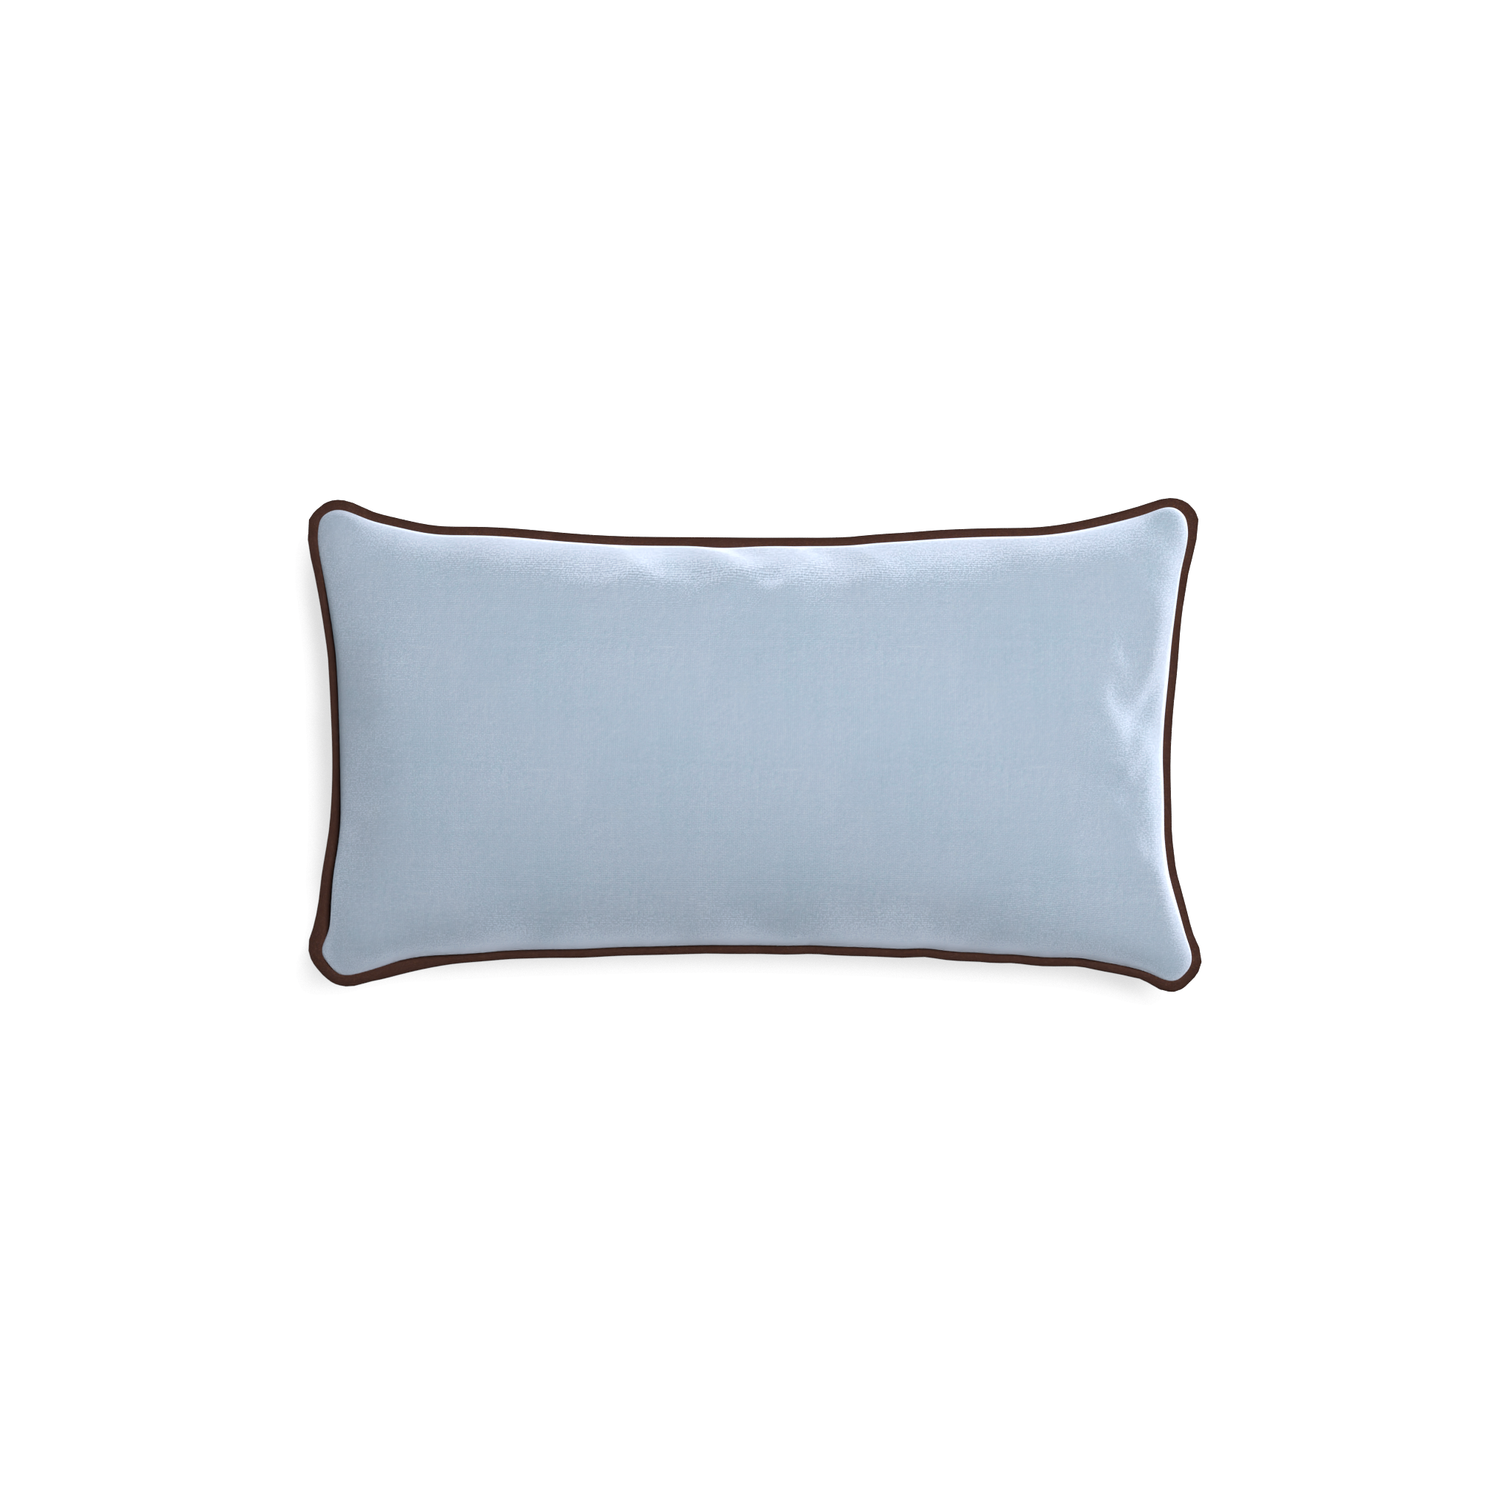 rectangle light blue pillow with brown piping